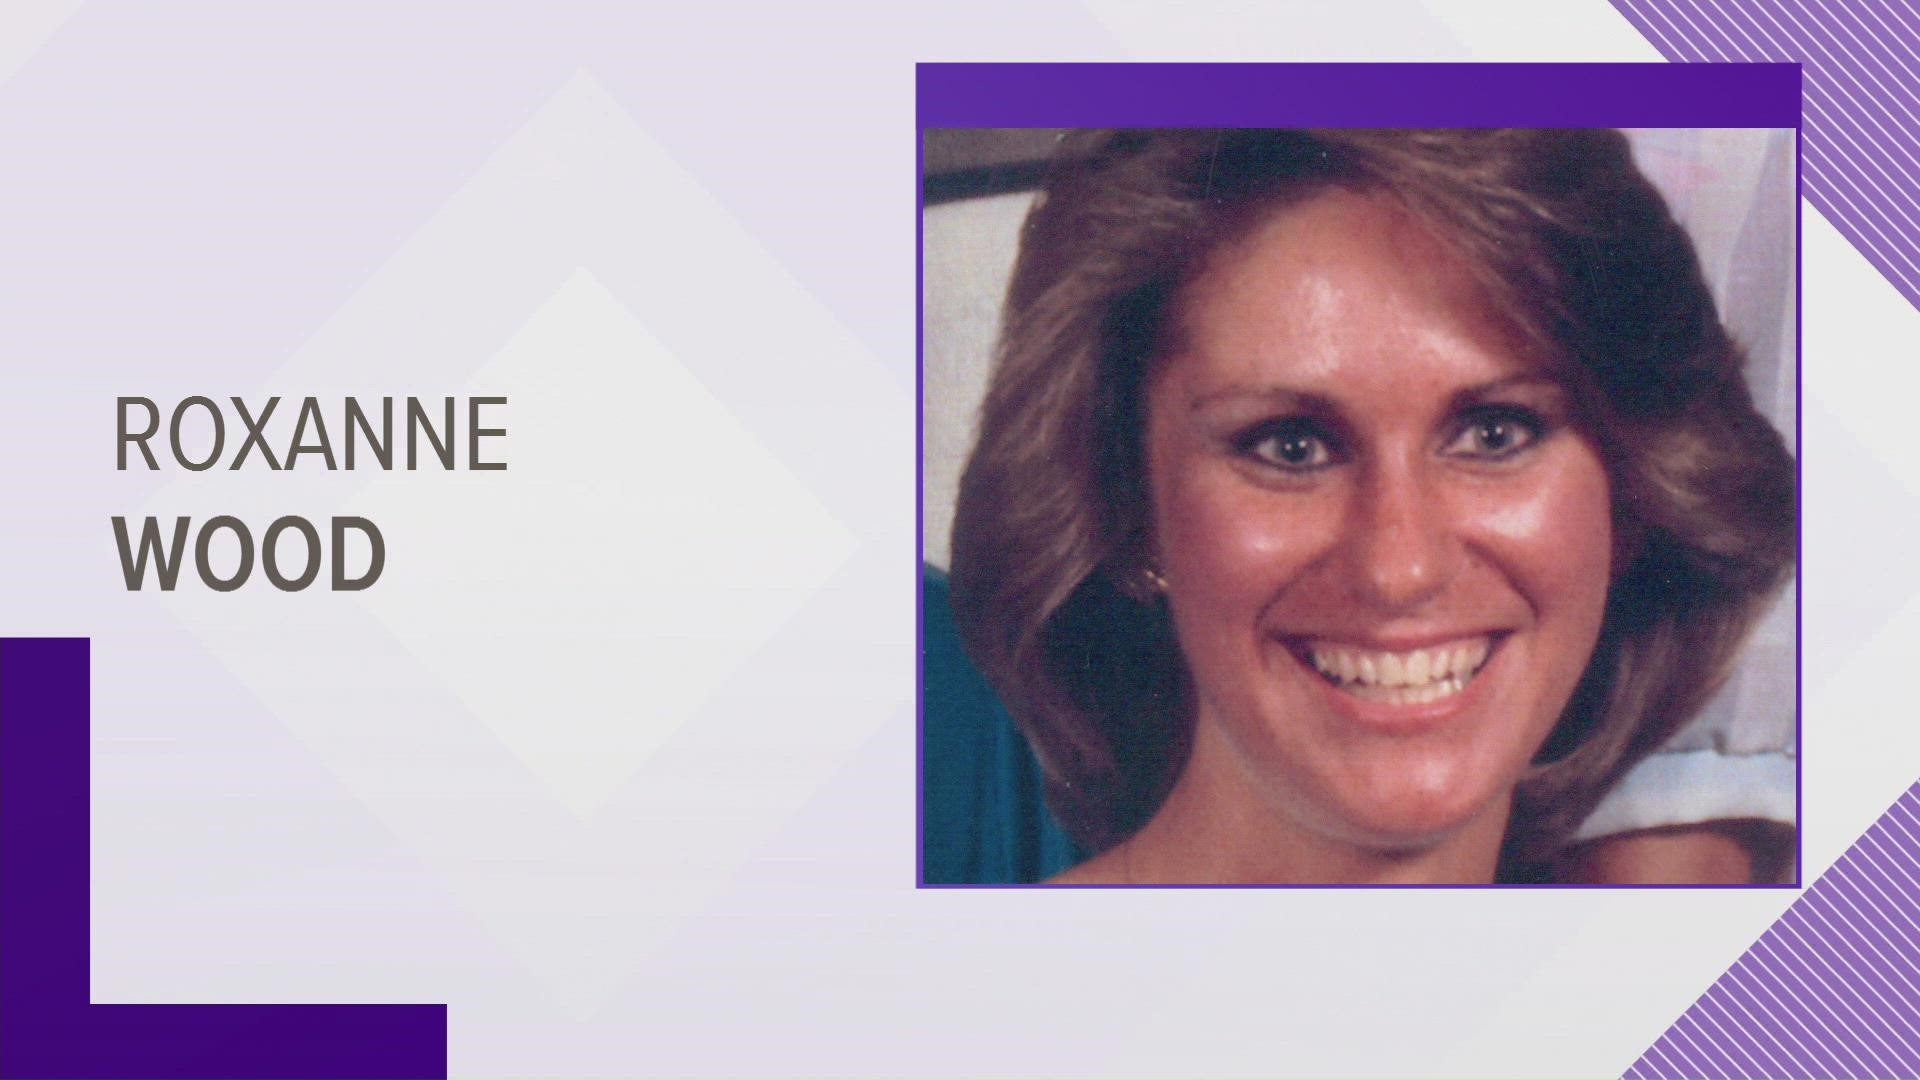 Roxanne Wood was murdered in 1987 and 35 years later police have made an arrest in the Niles cold case homicide.